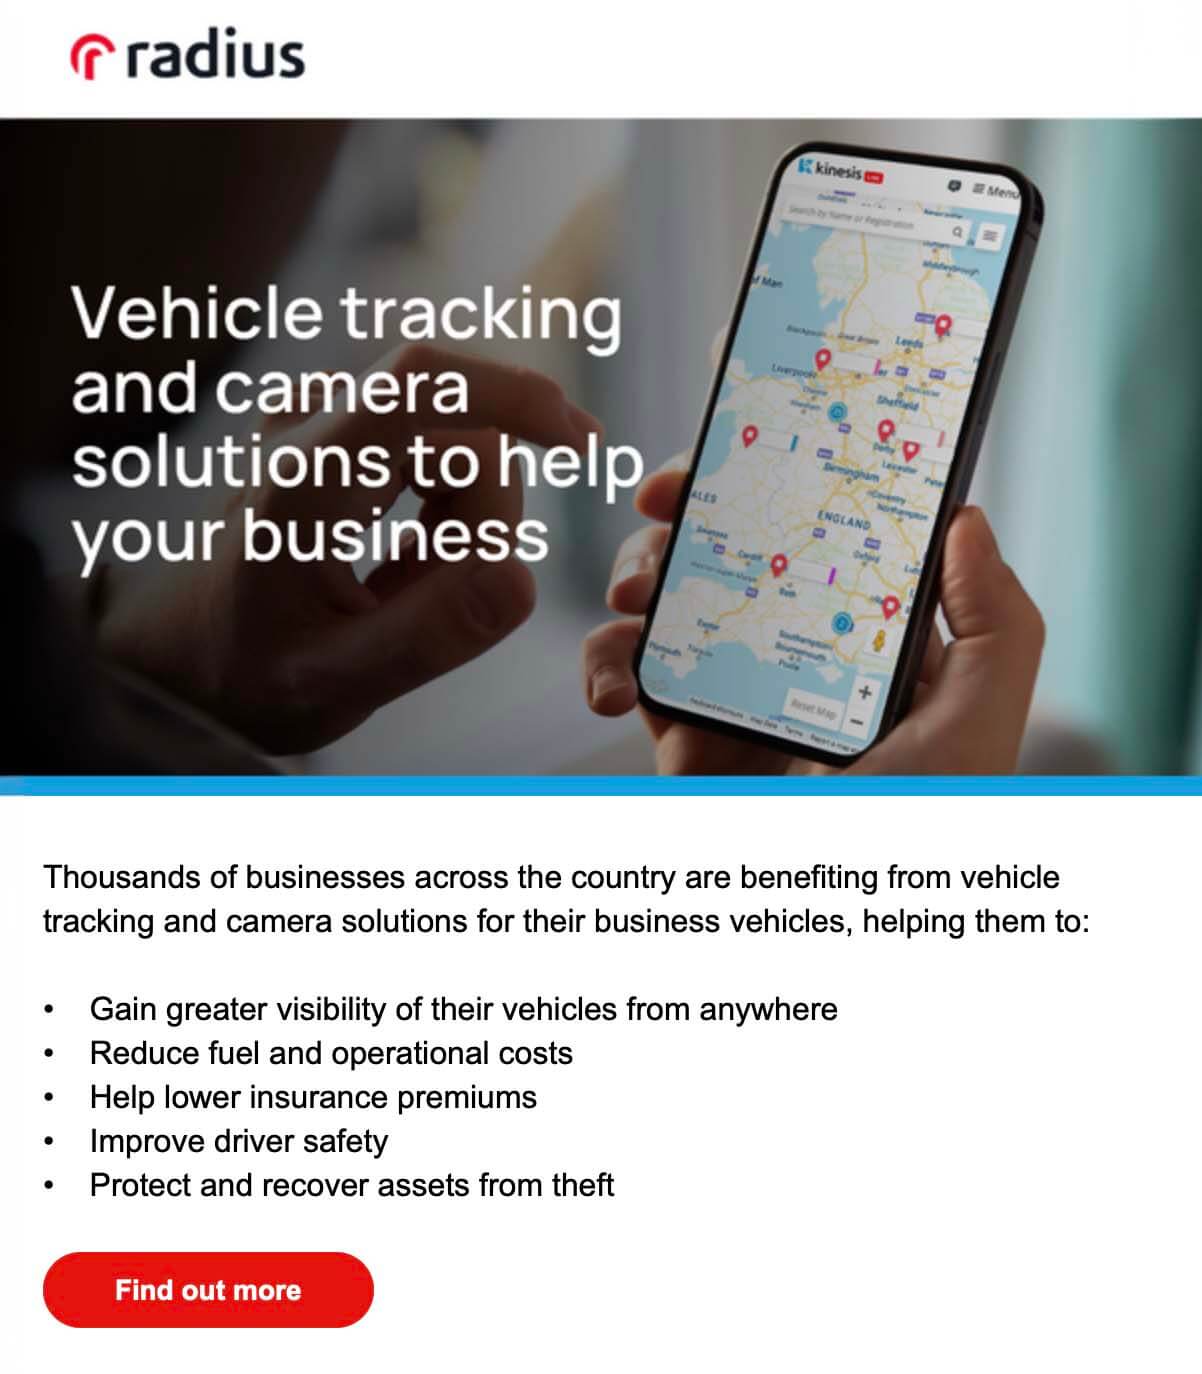 Precise Vehicle Tracking for All